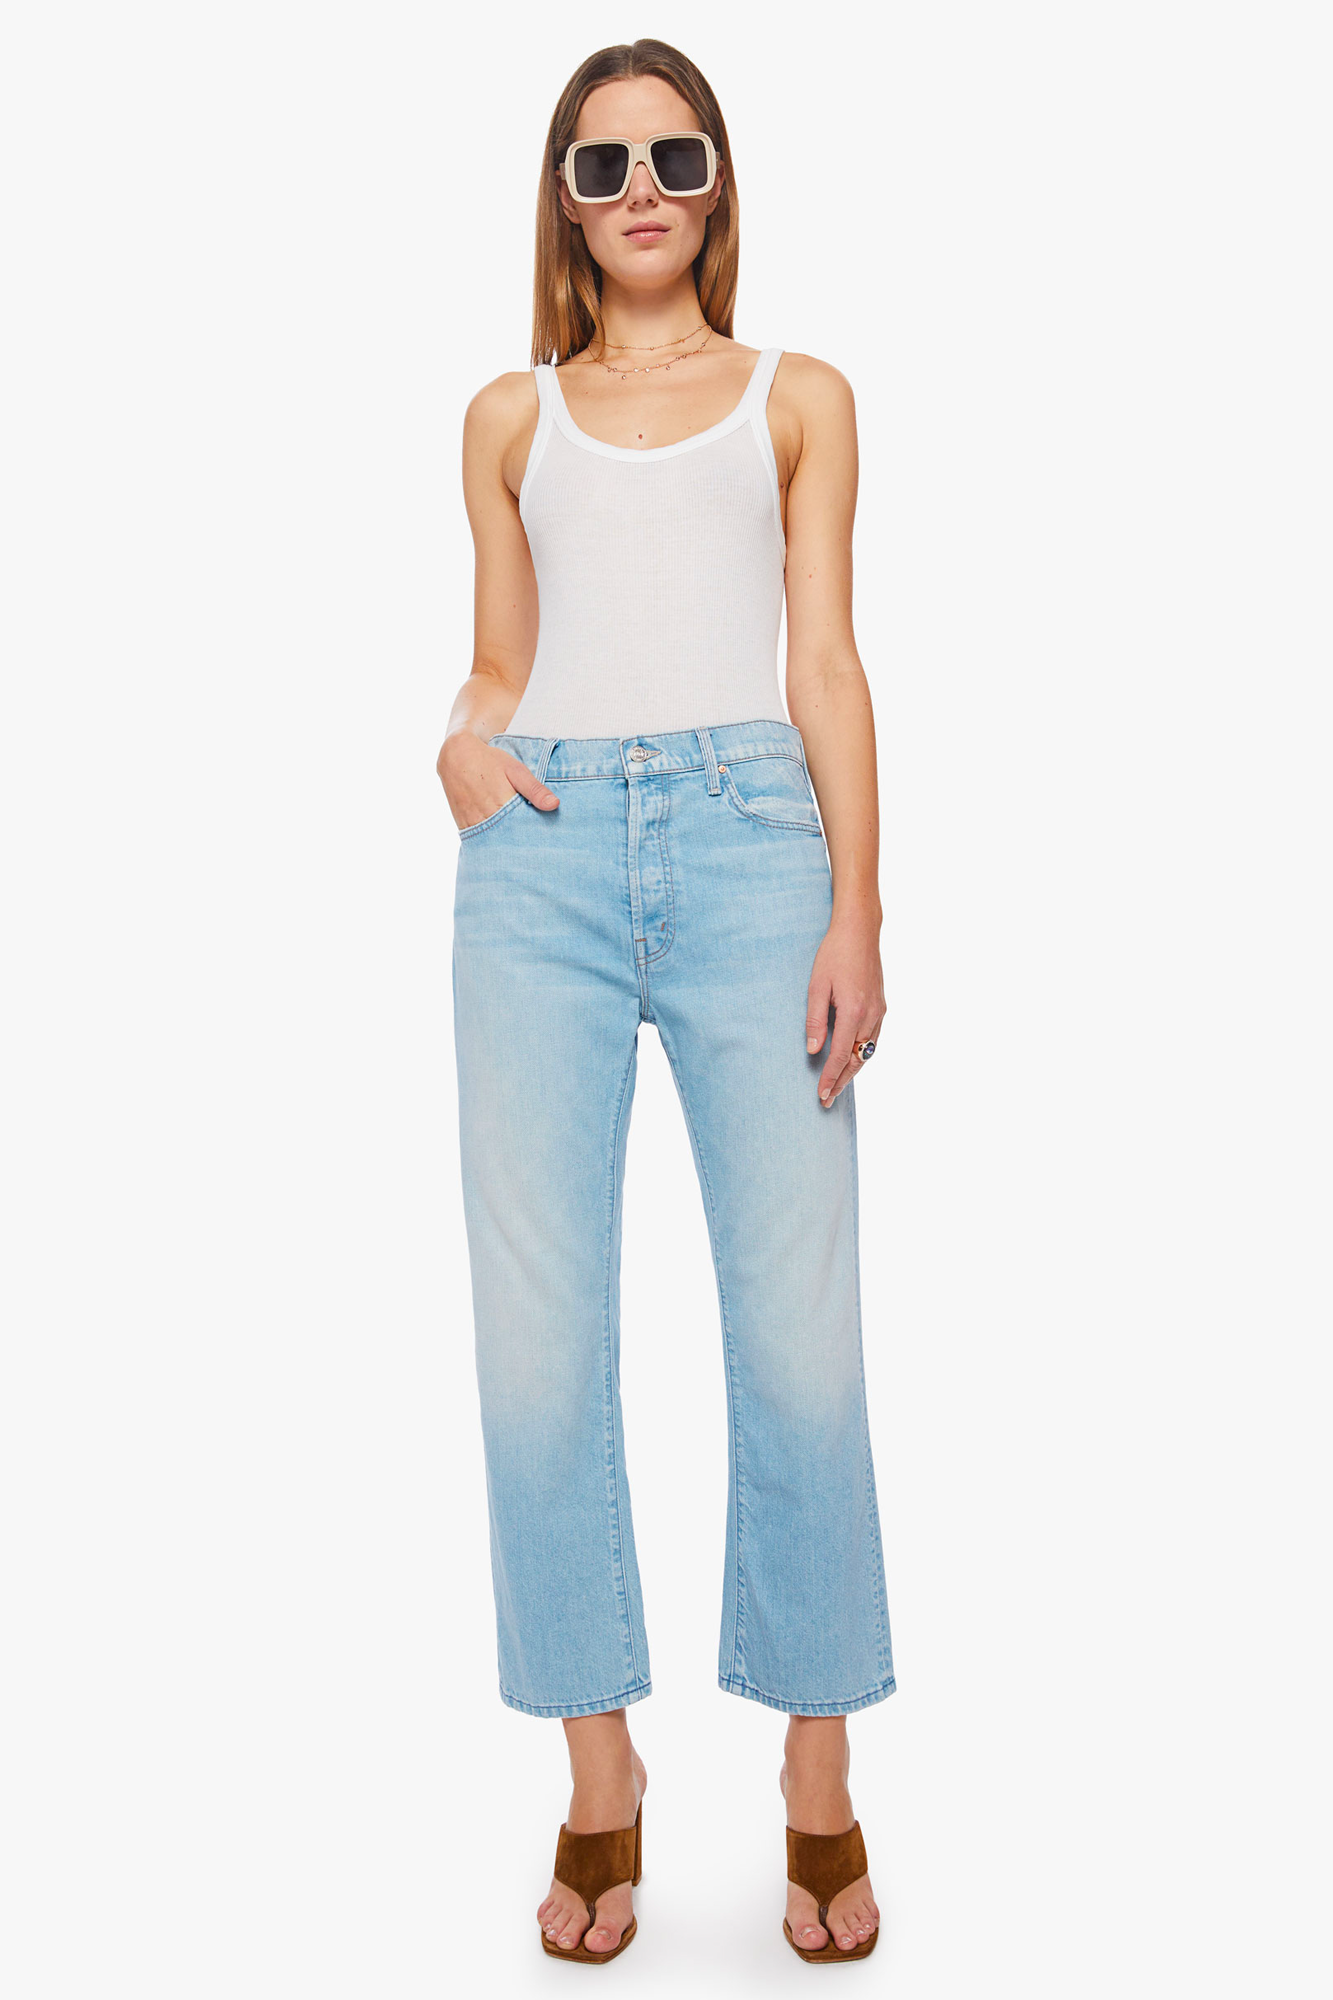 The Ditcher Crop from Mother is the perfect choice. With its lightweight yet durable construction, these denim pants will provide you with years of reliable wear.